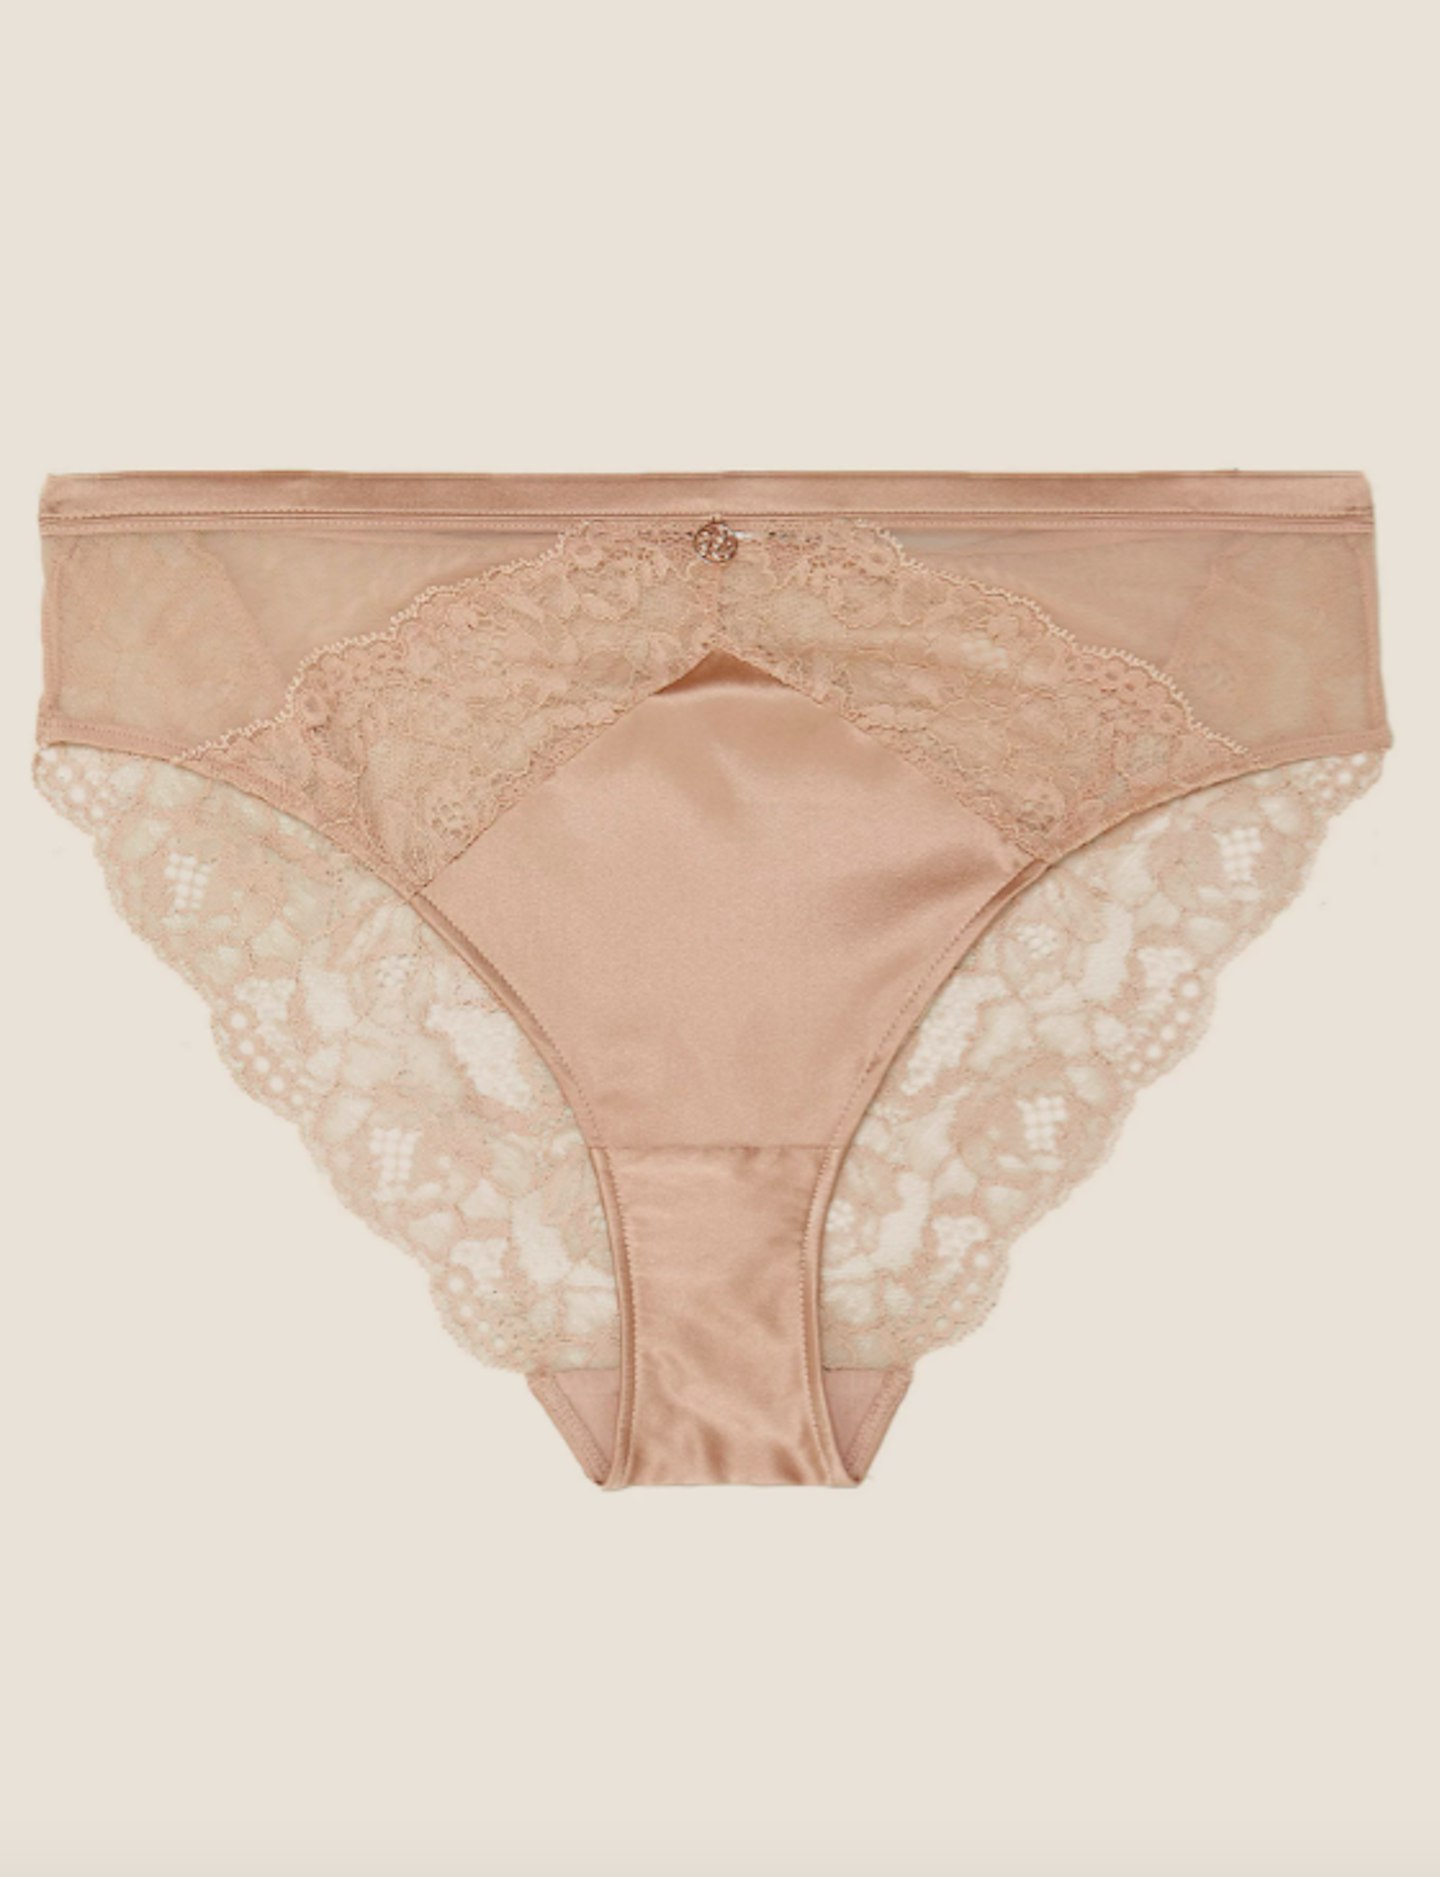 Rosie For M&S, Silk & Lace High-Leg Knickers